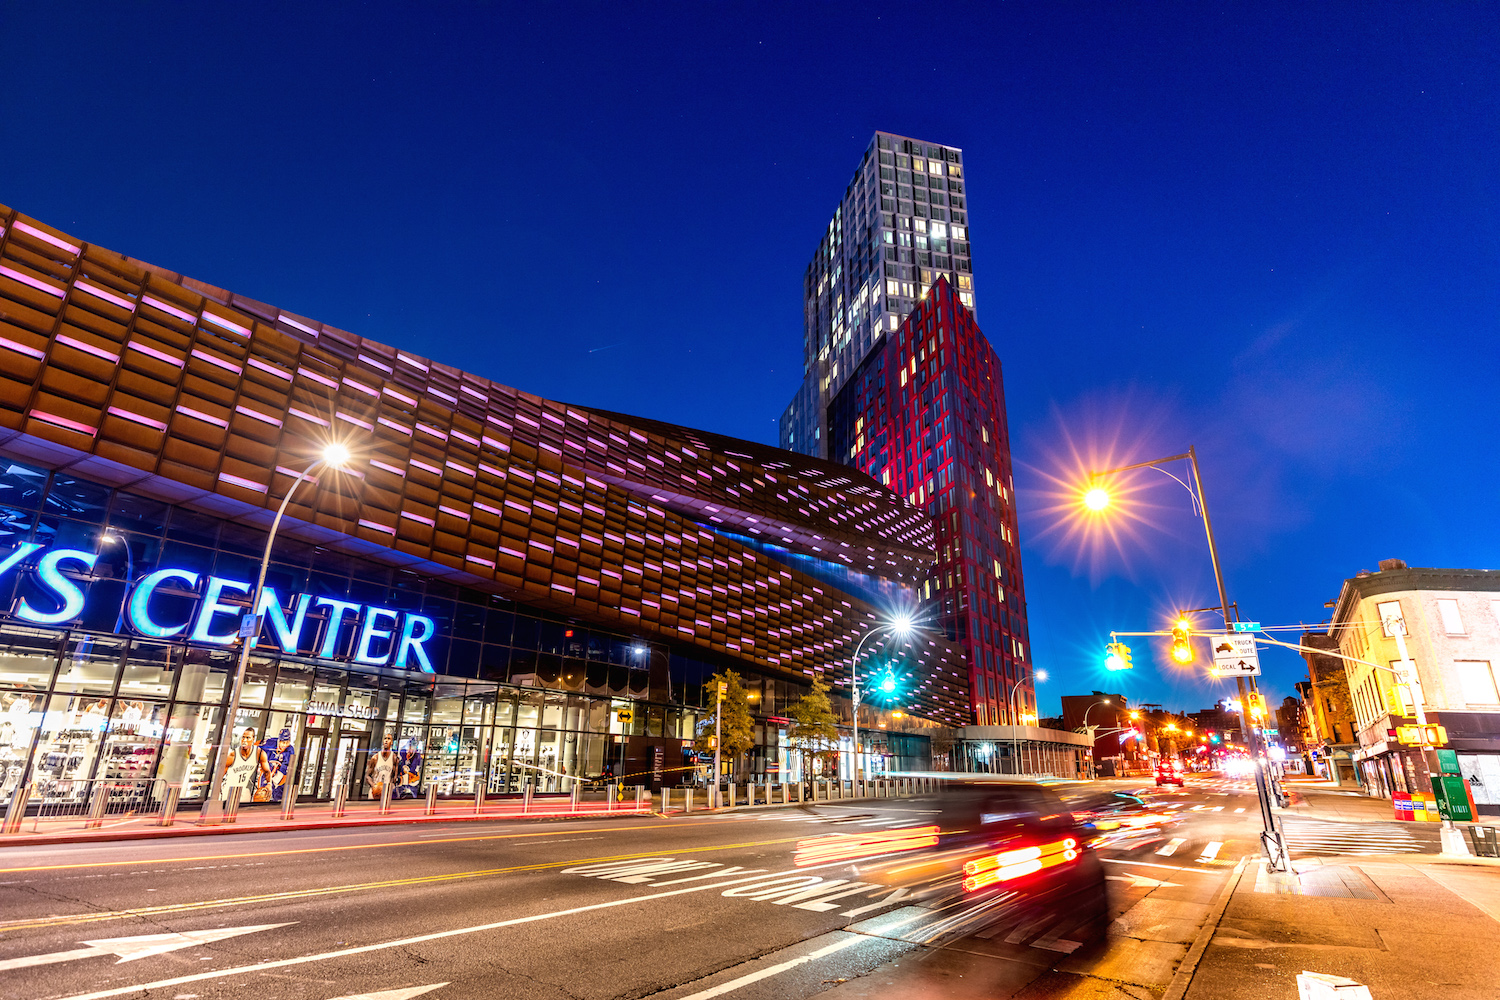 Night-time view of the Barclays Center and 461 Dean Street.